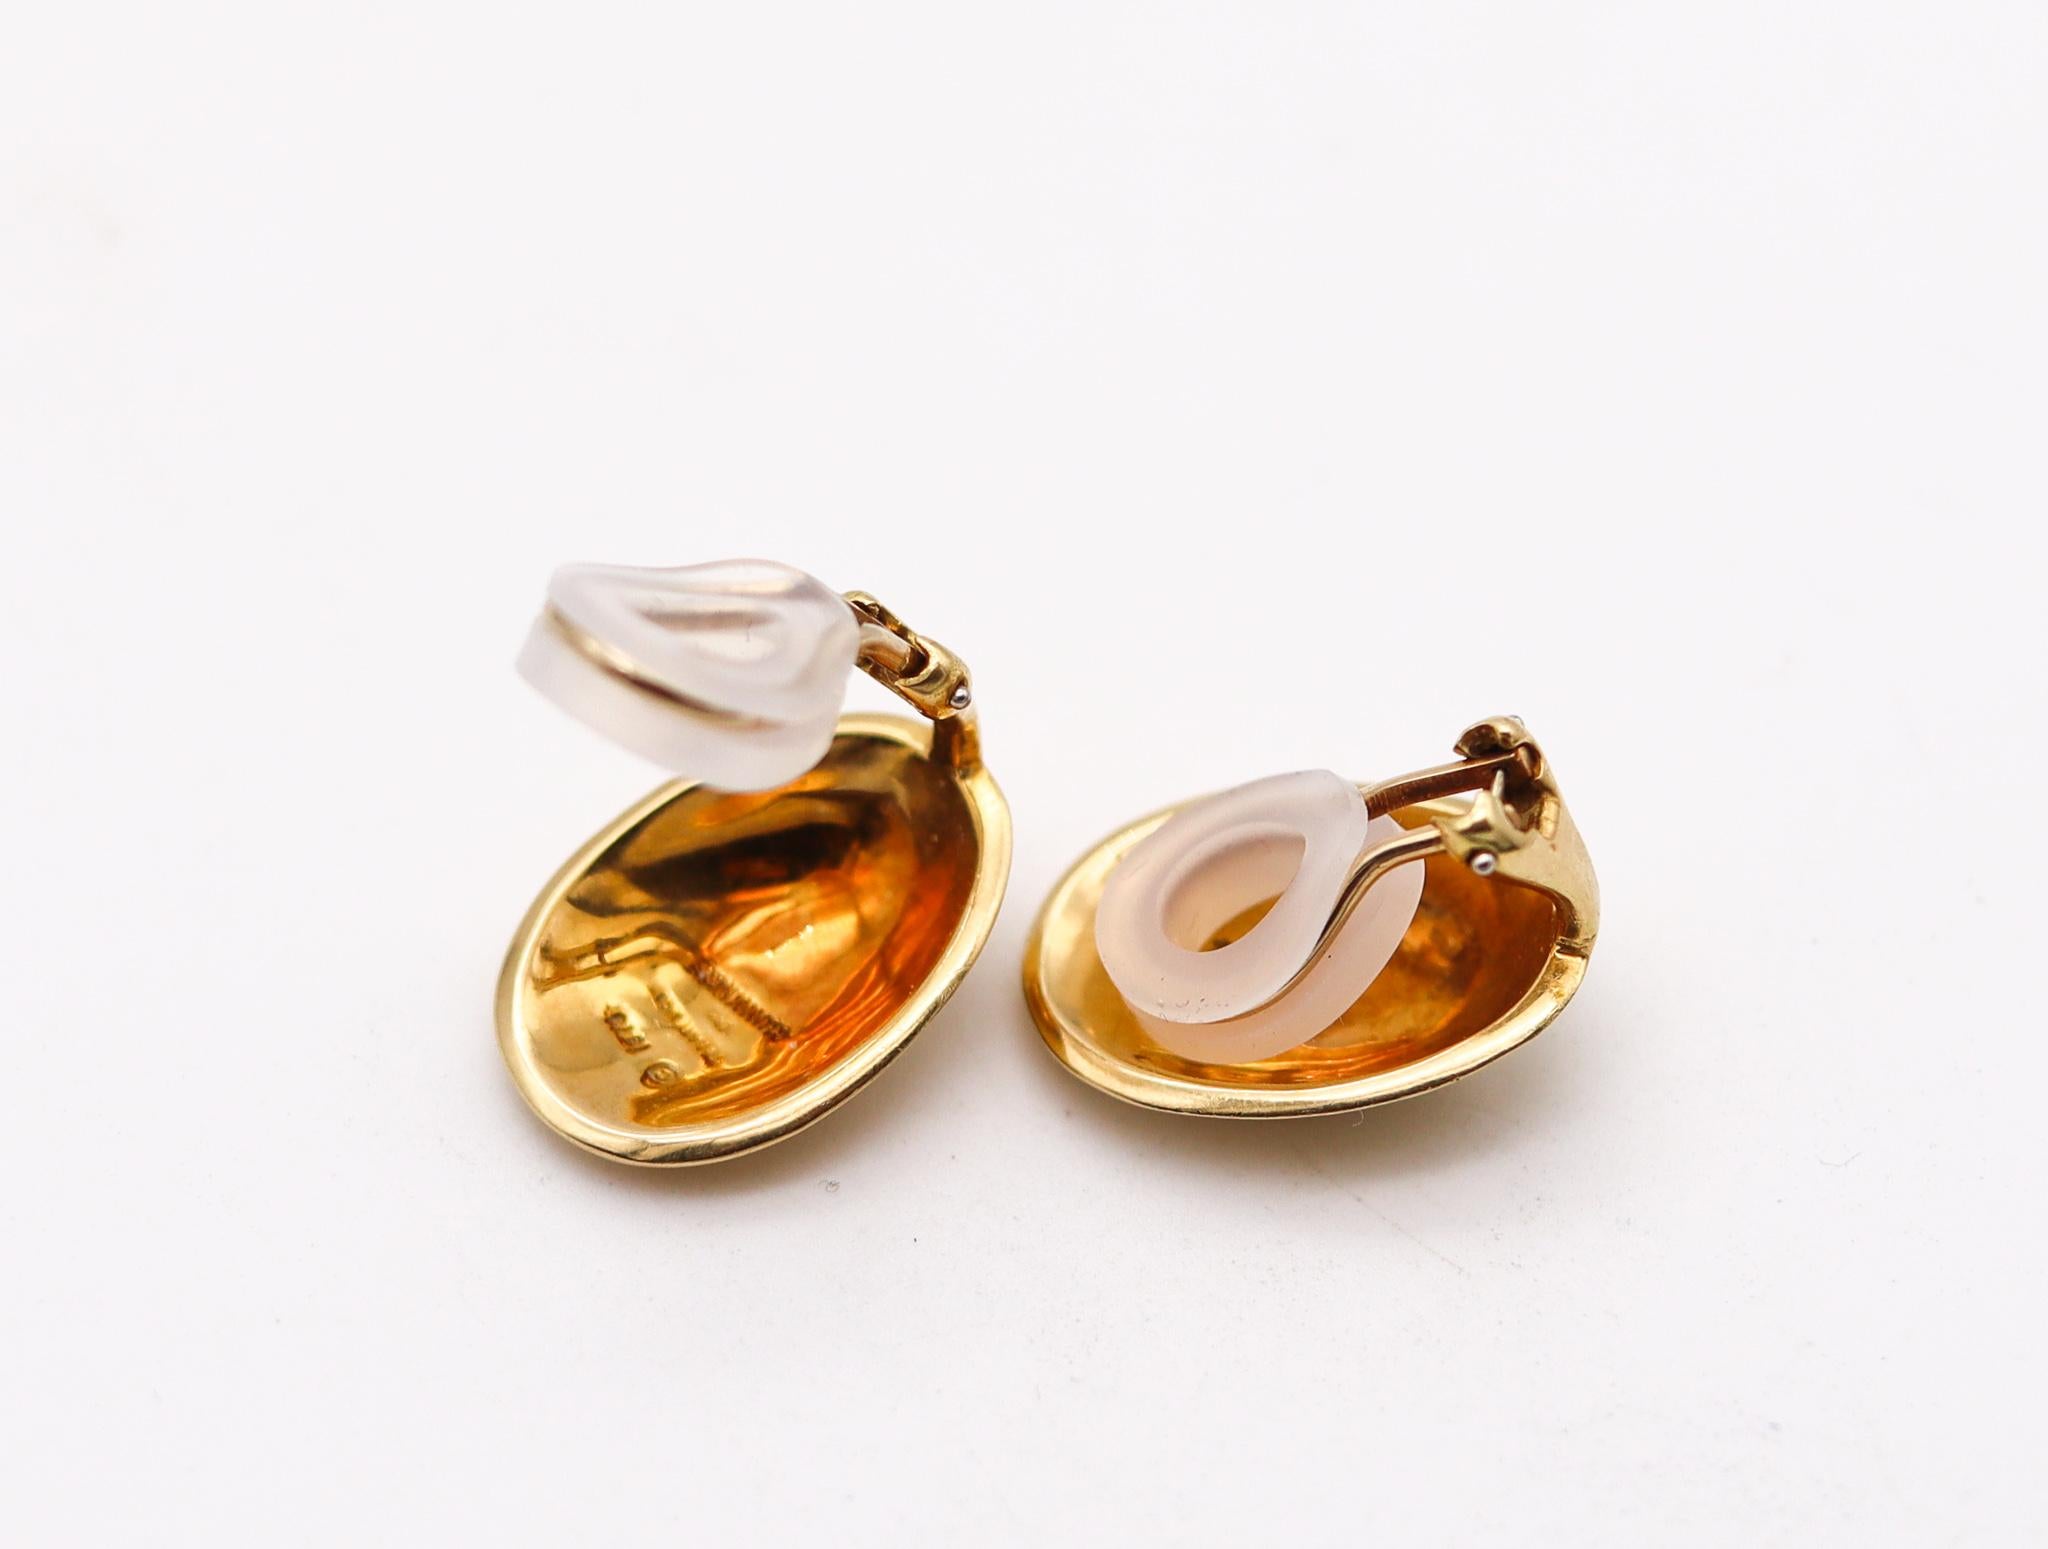 Tiffany & Co. 1978 Angela Cummings Rare Oval Convex Clip Earrings in 18Kt Gold In Excellent Condition For Sale In Miami, FL